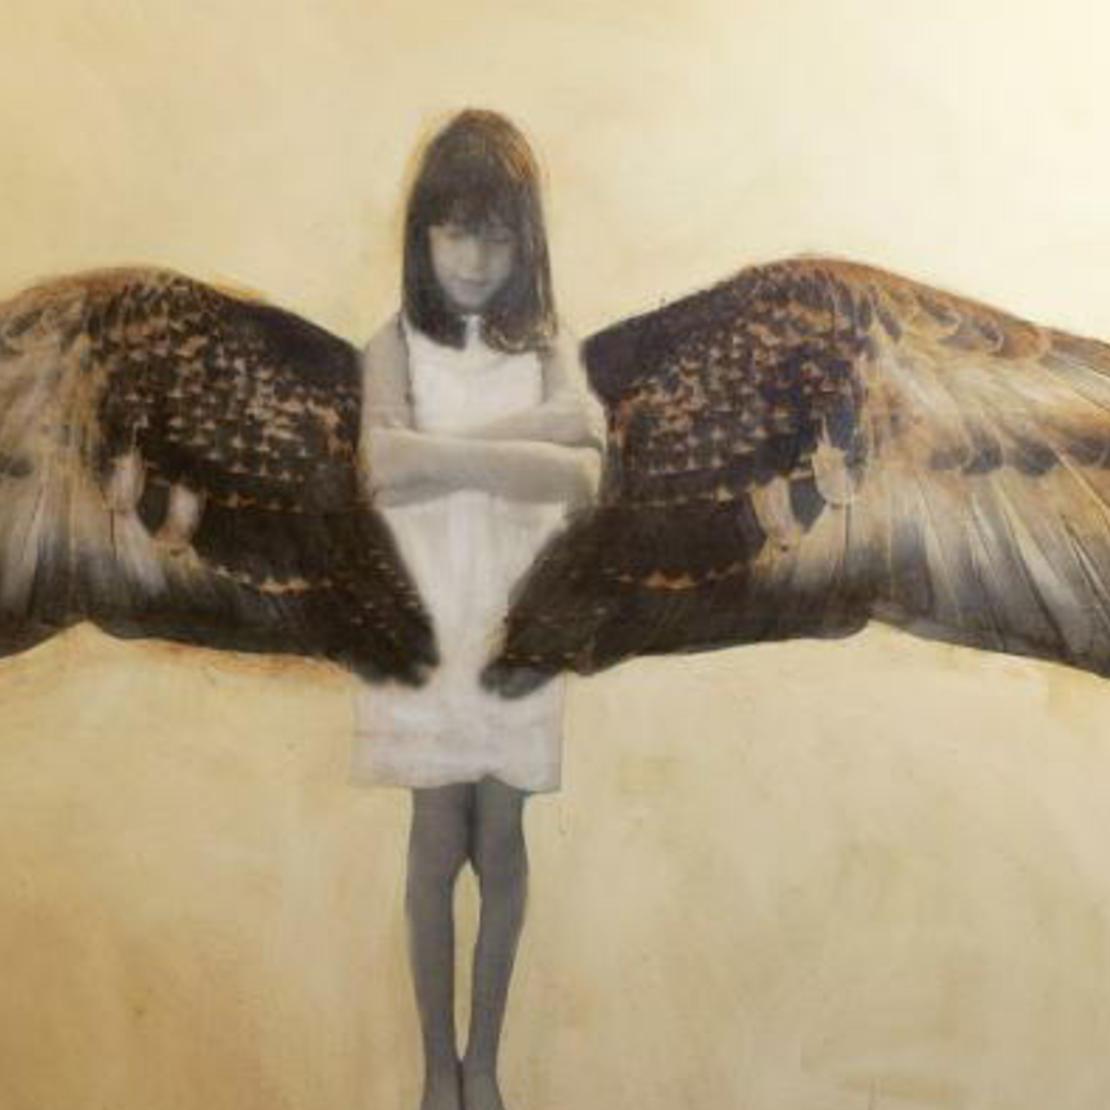 WINGS - Contemporary Mixed Media Art by Anke Schofield